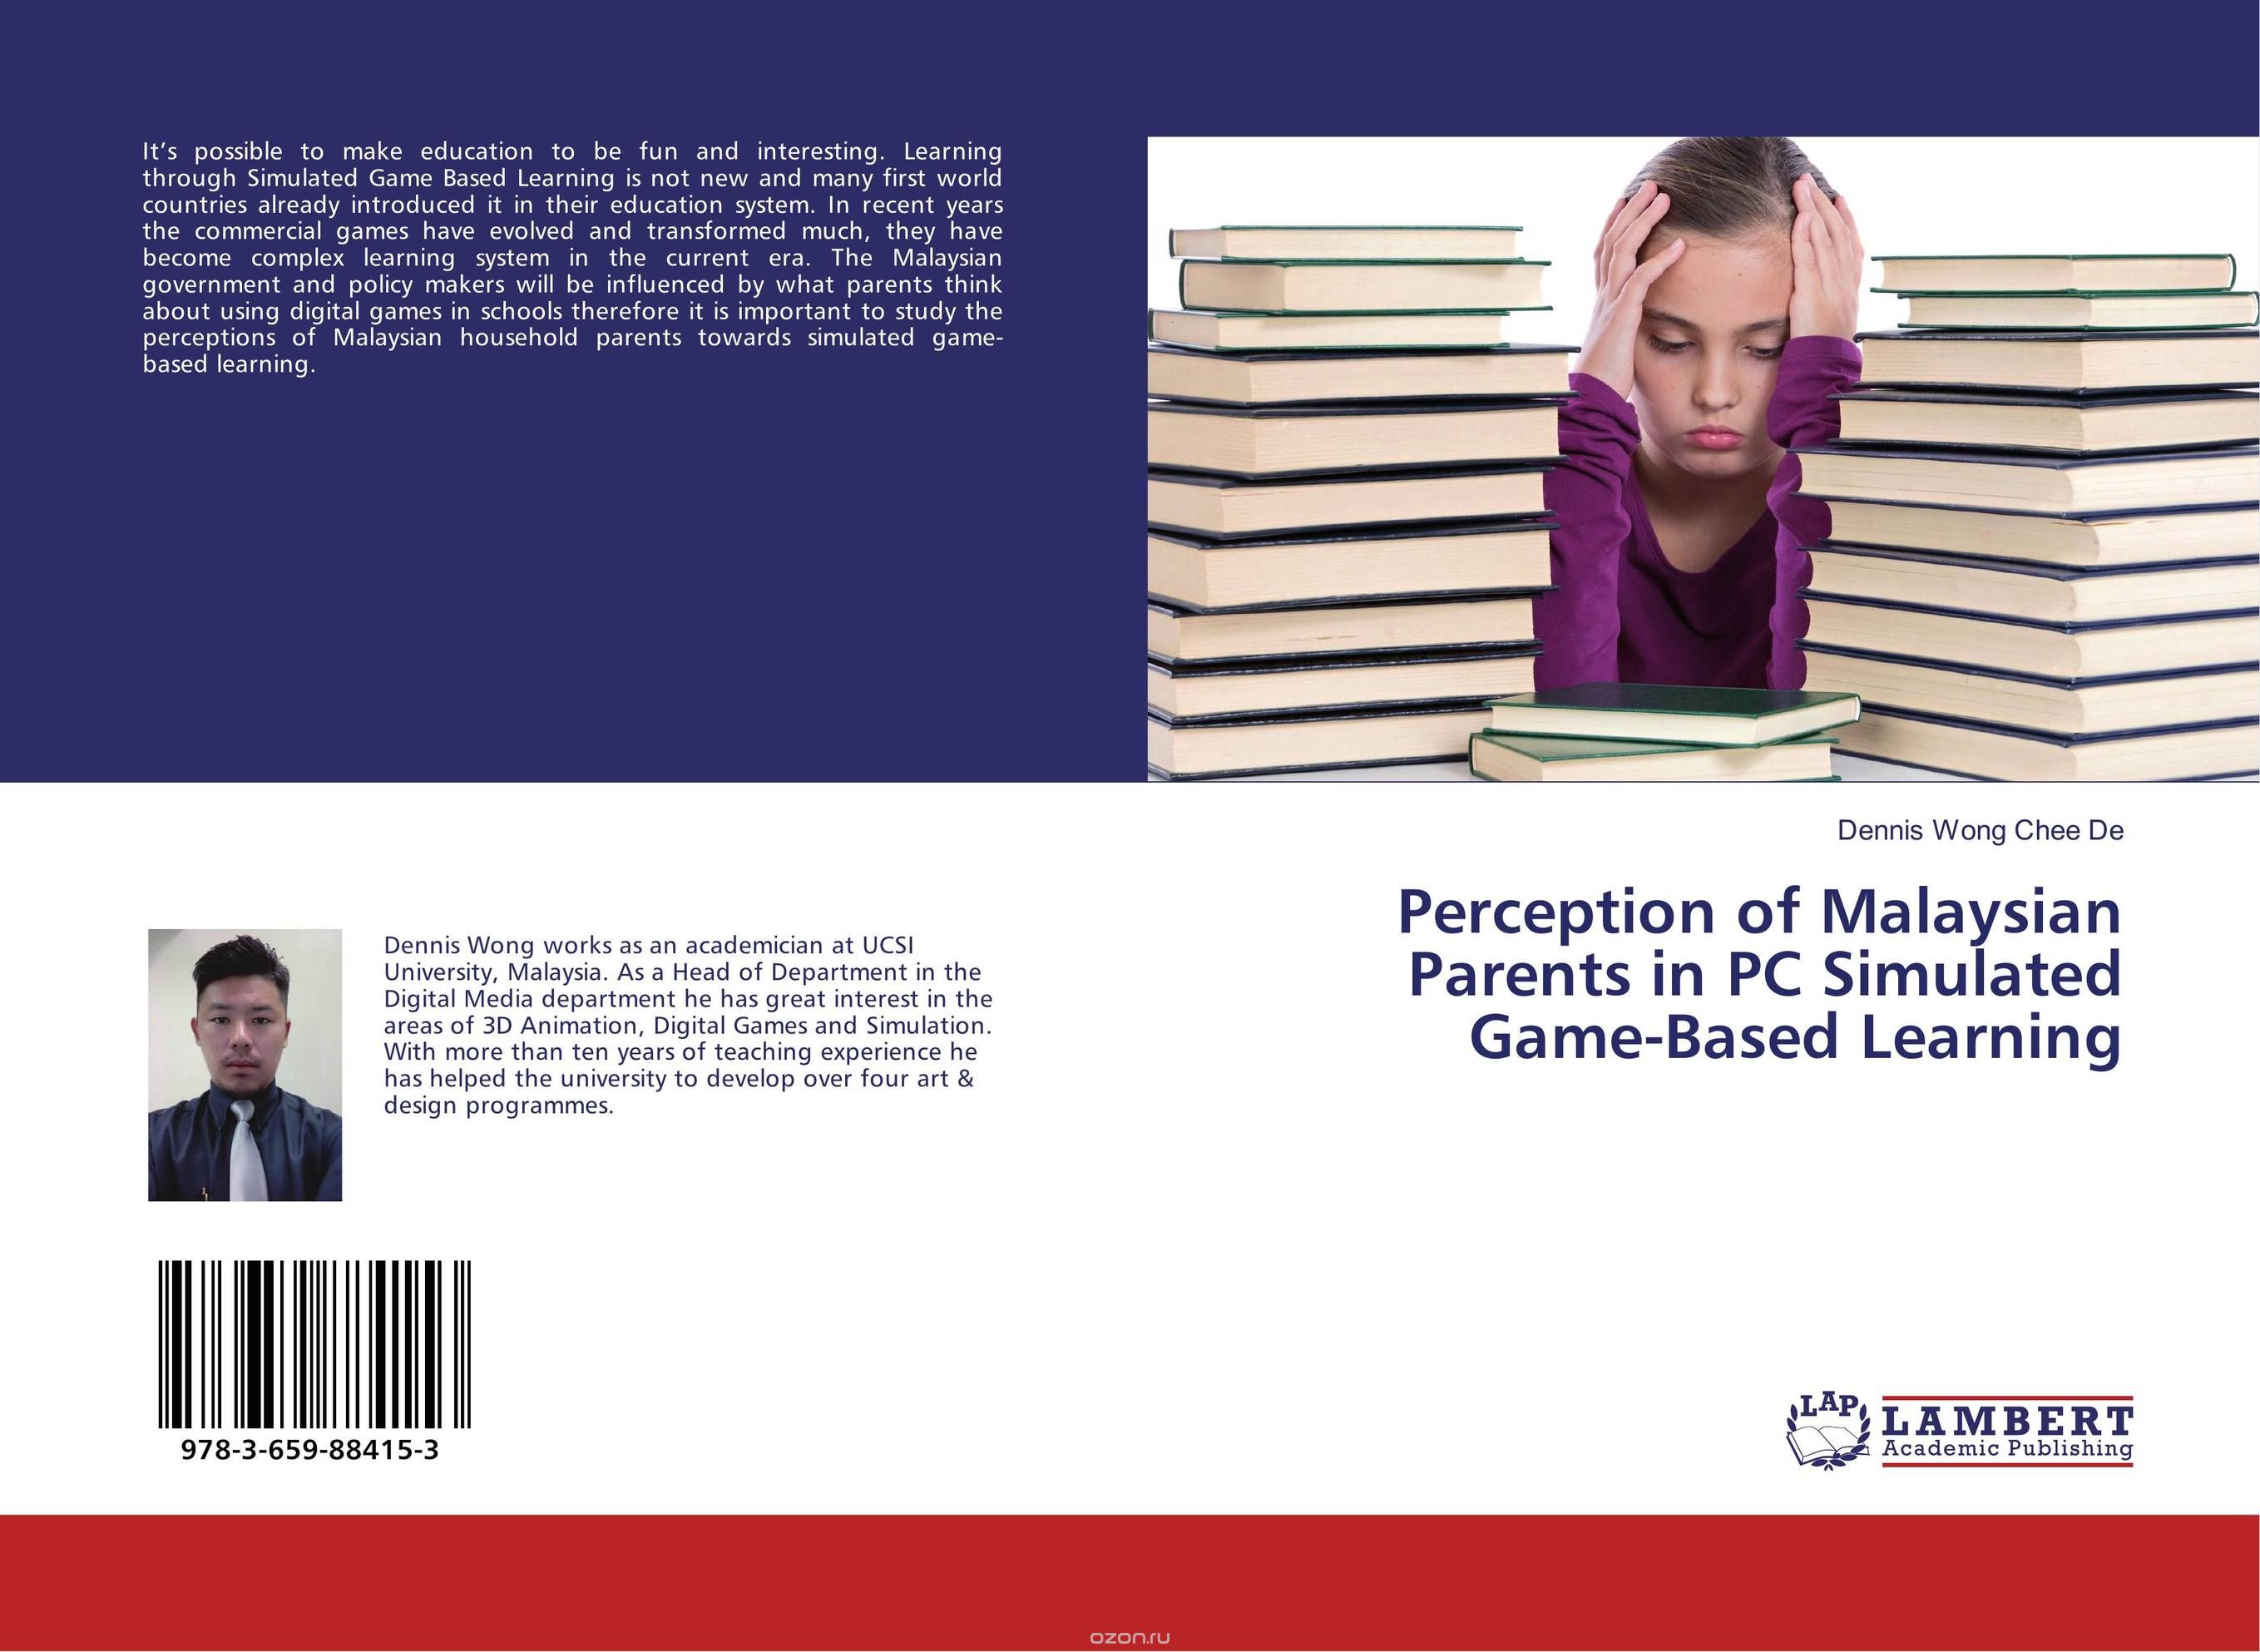 Perception of Malaysian Parents in PC Simulated Game-Based Learning